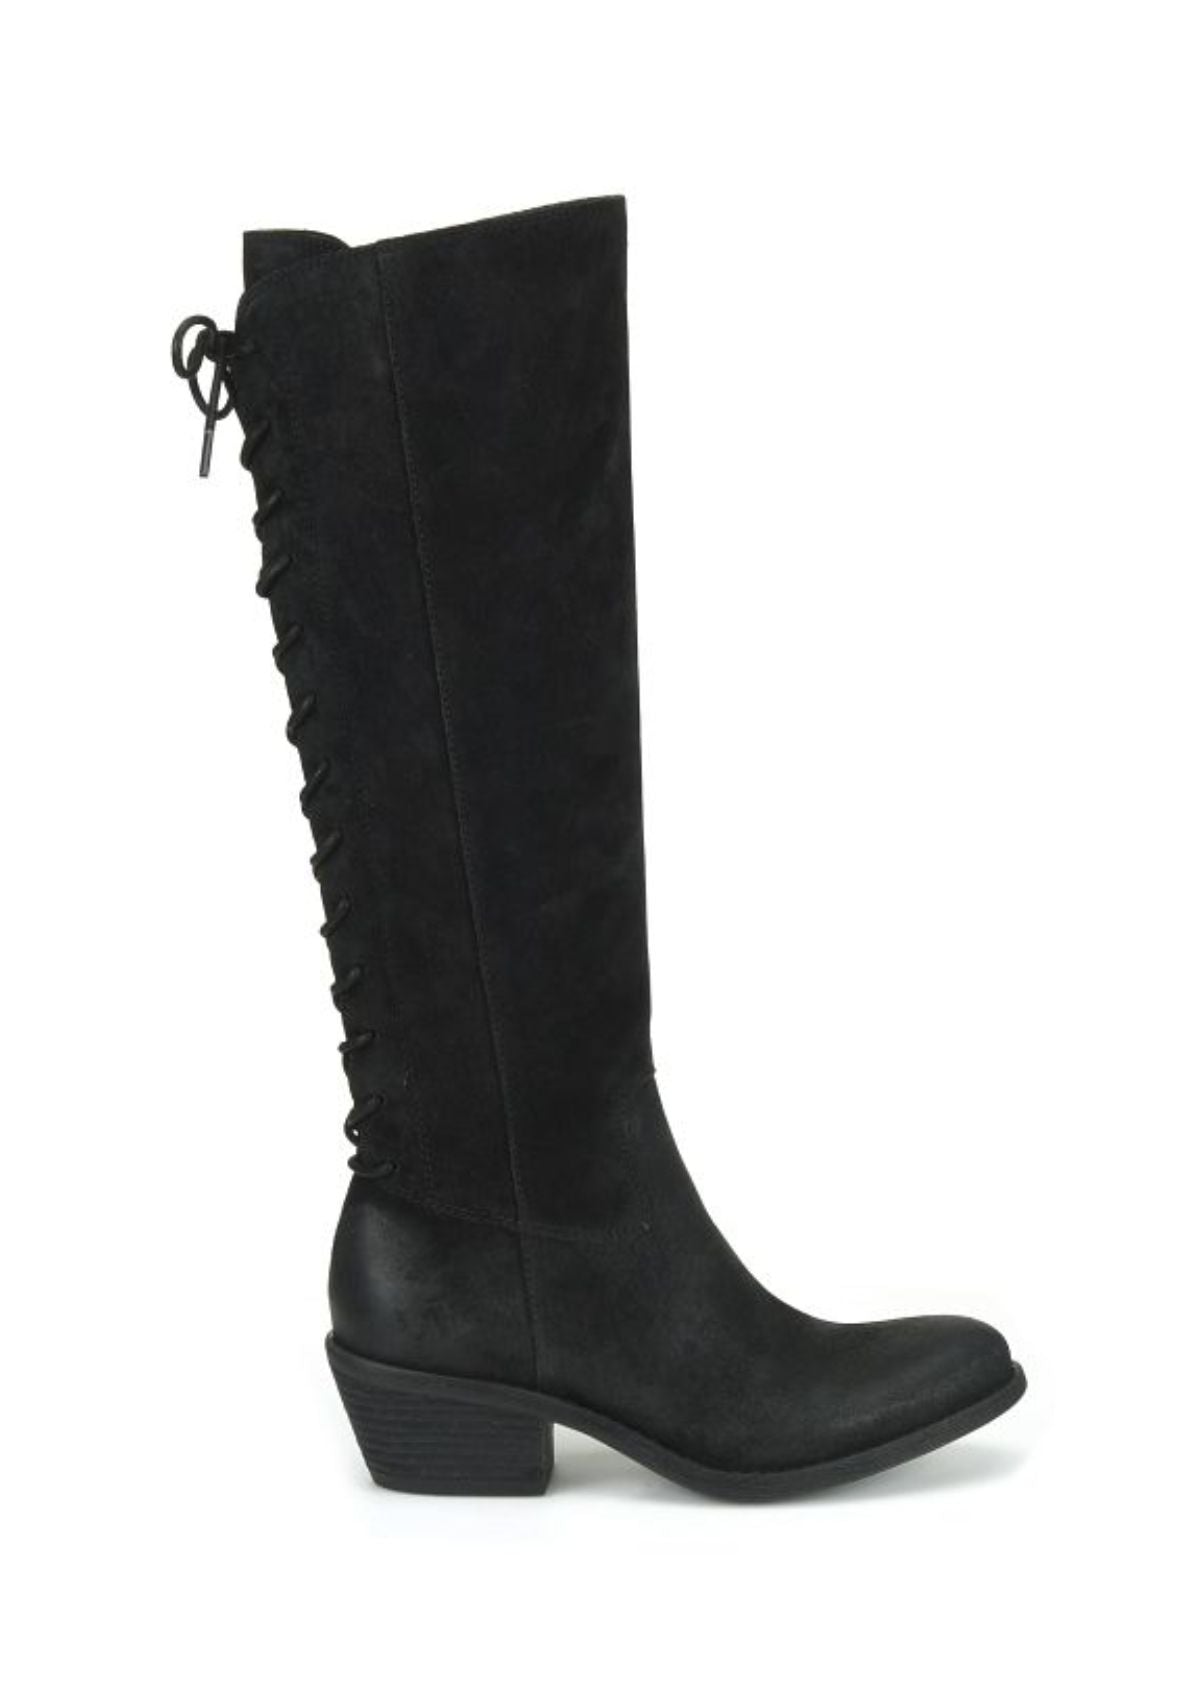 Boots-Fashion-New Shoes-Ruby Jane.